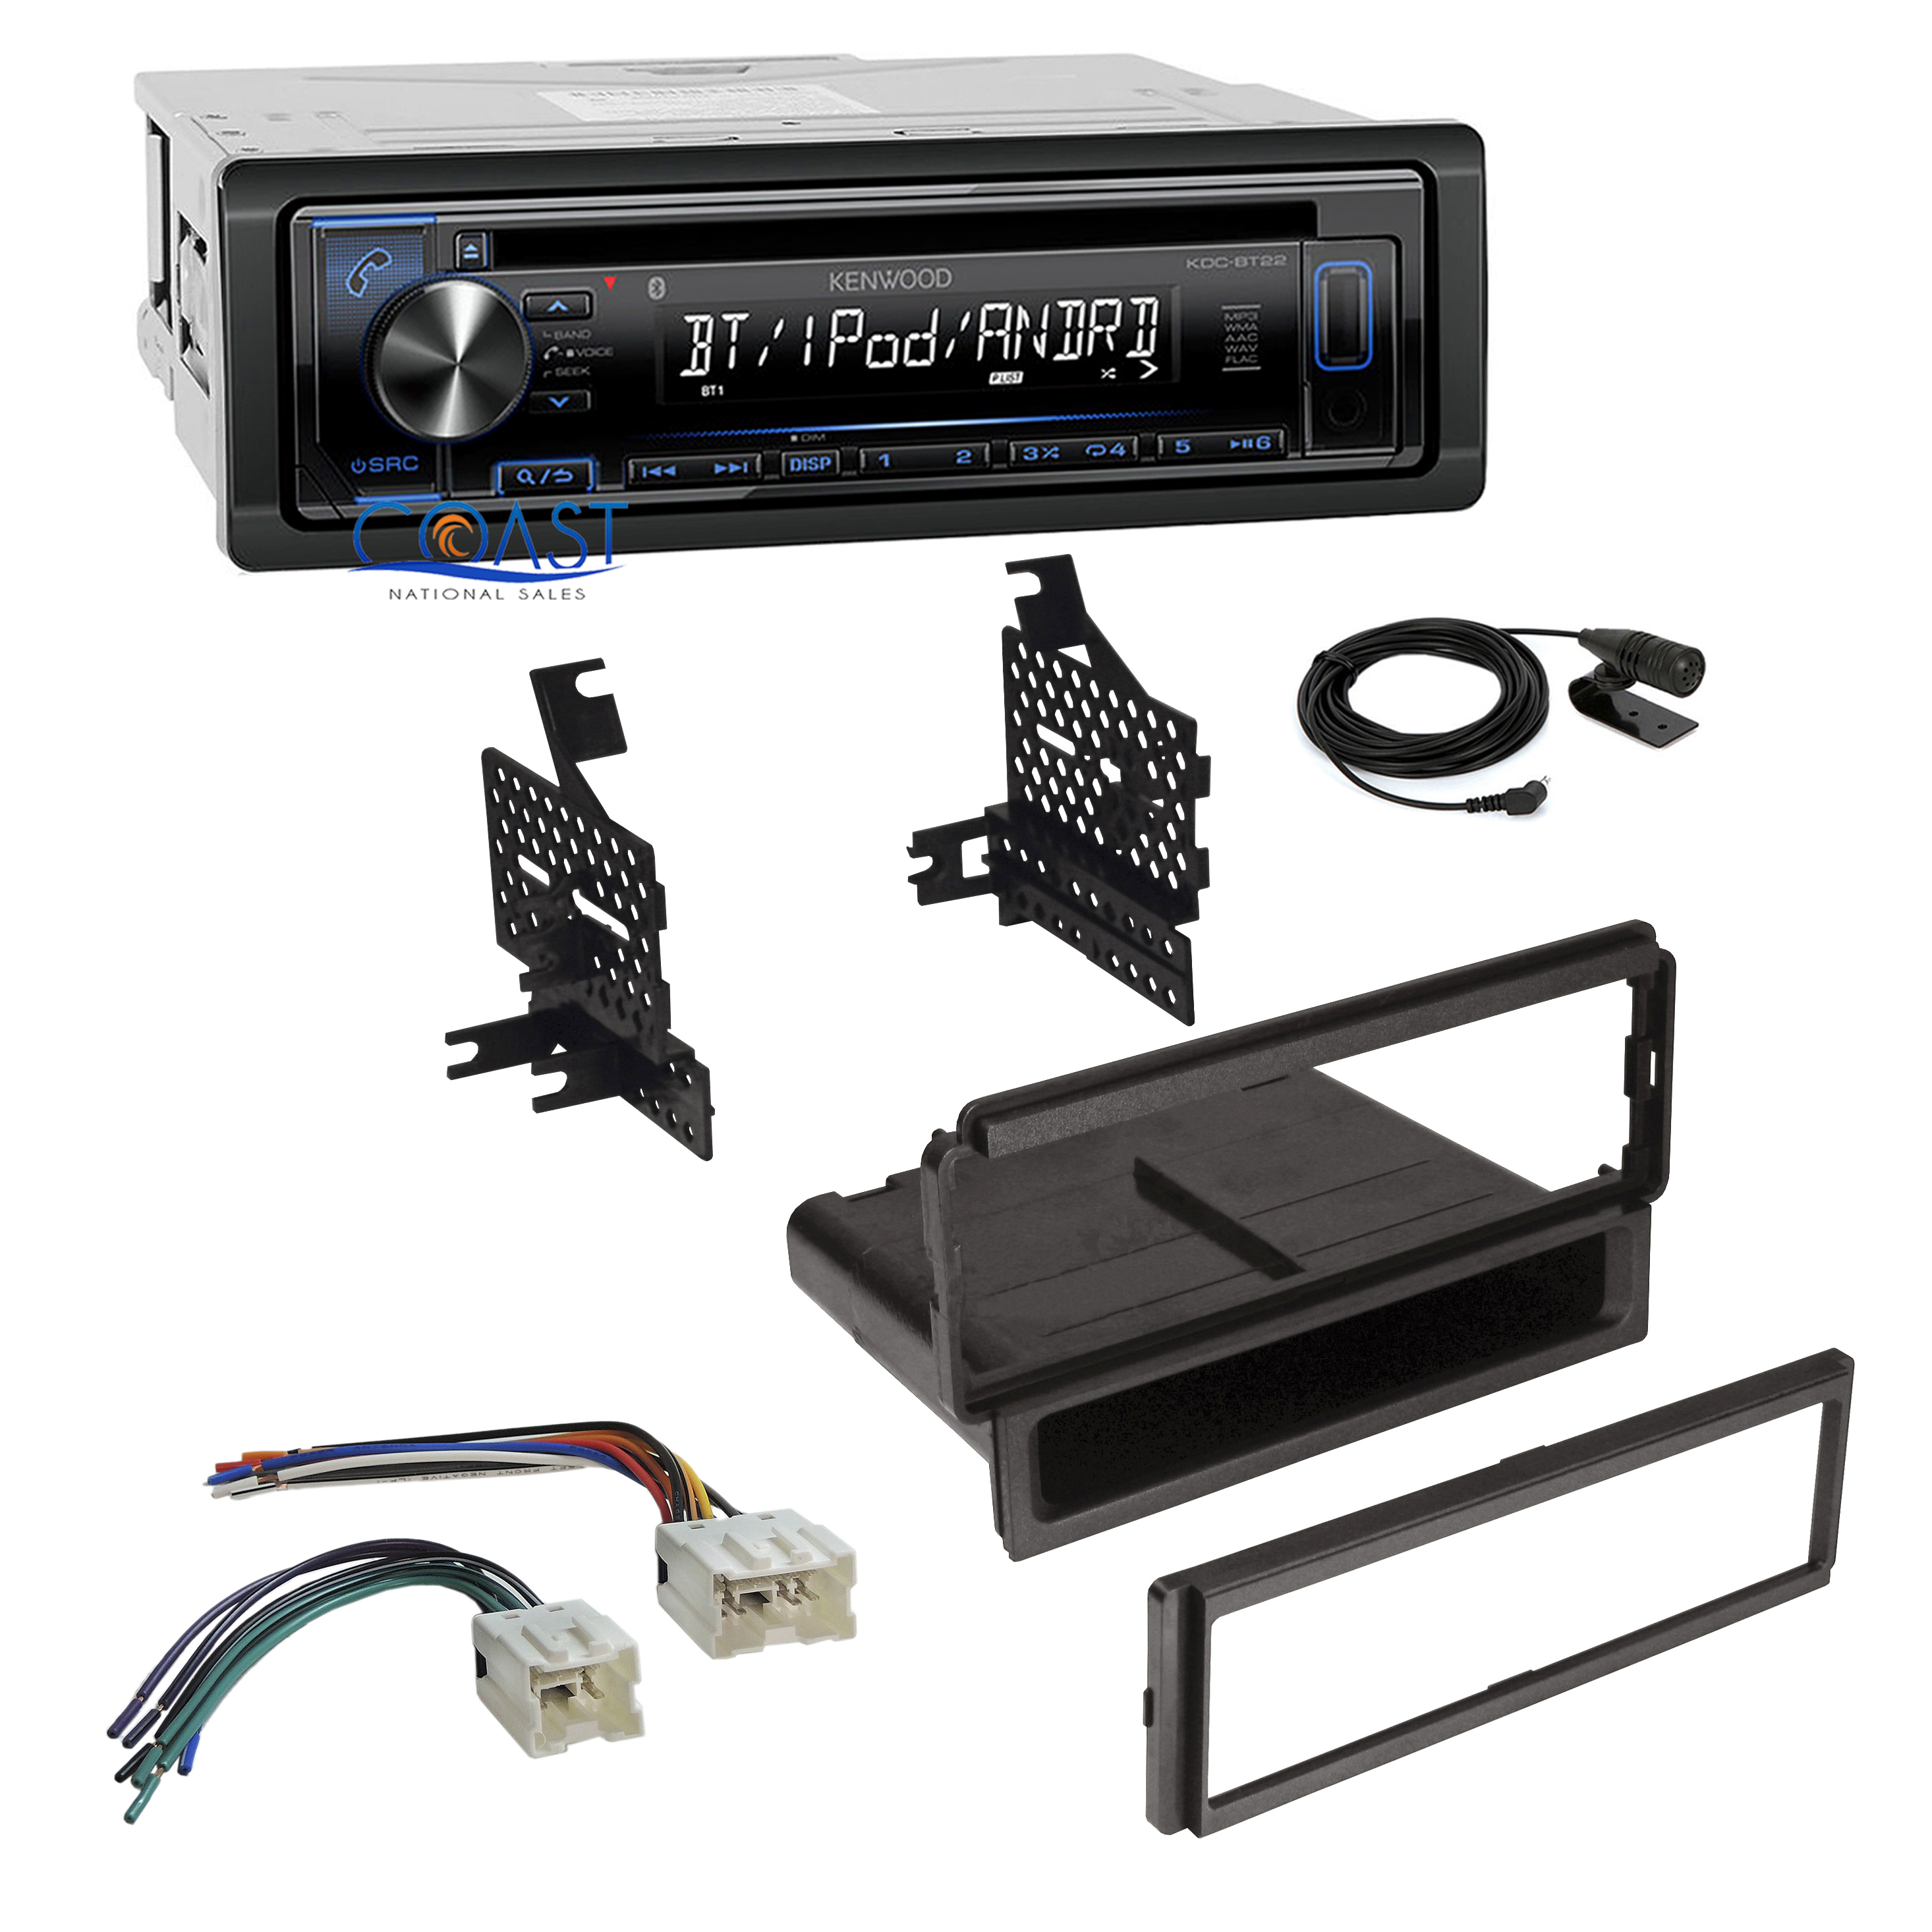 Nissan Frontier Stereo Wiring - Wiring Diagram